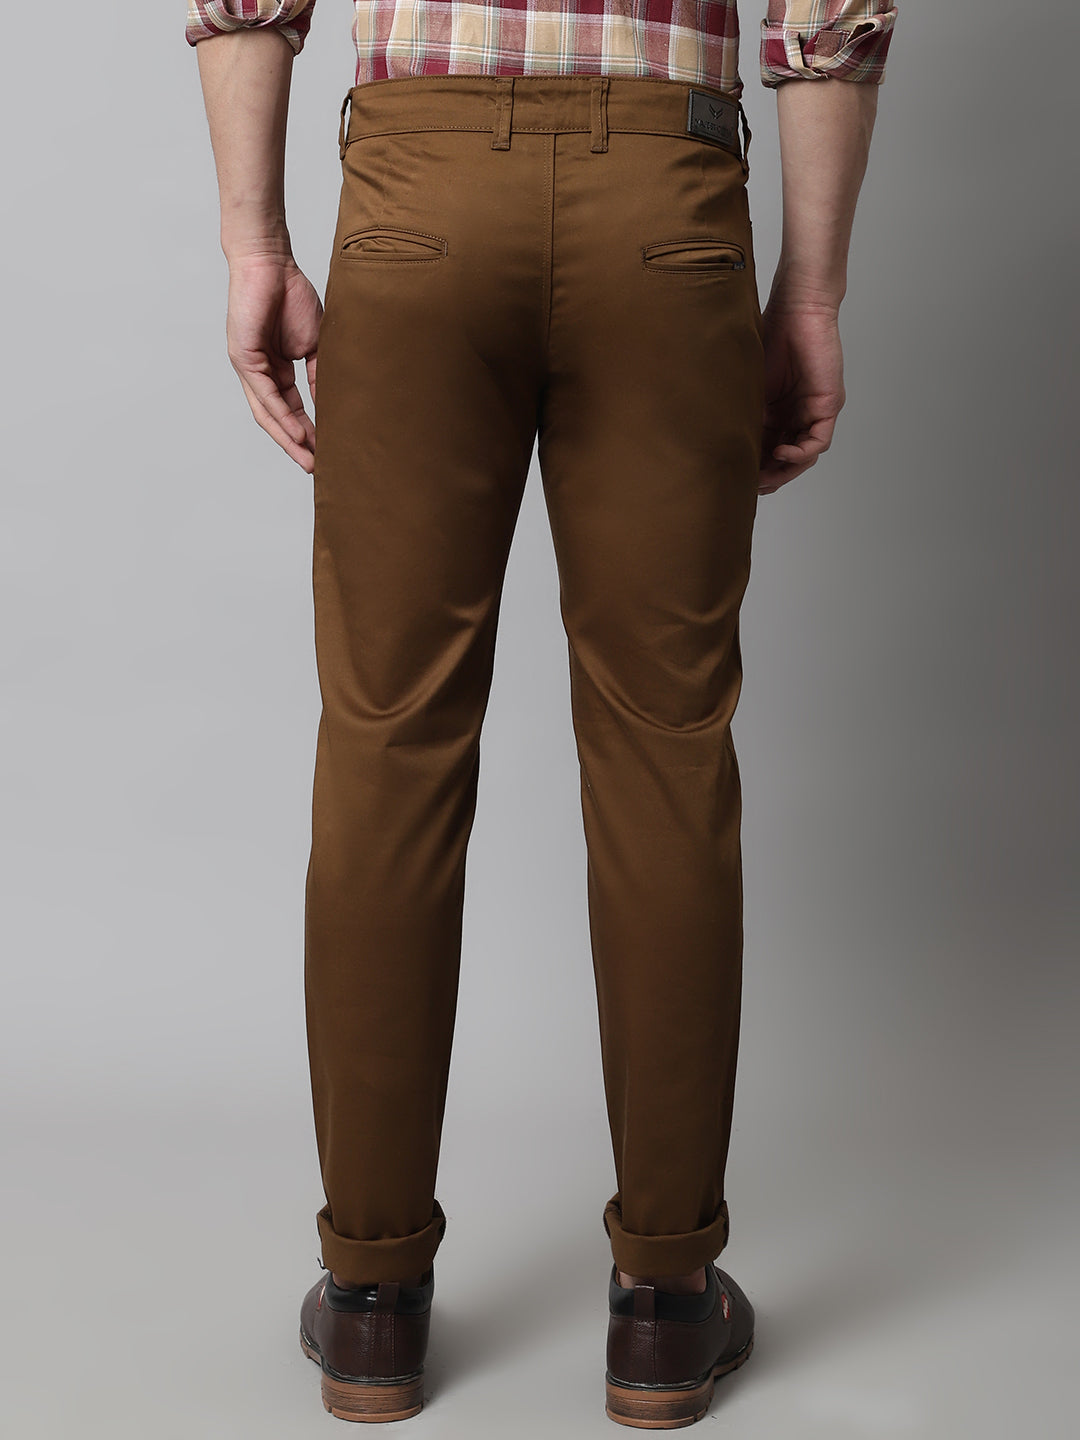 Majestic Man Regular Fit Satin Finish Cotton Casual Solid Chinos Trouser - Caramel